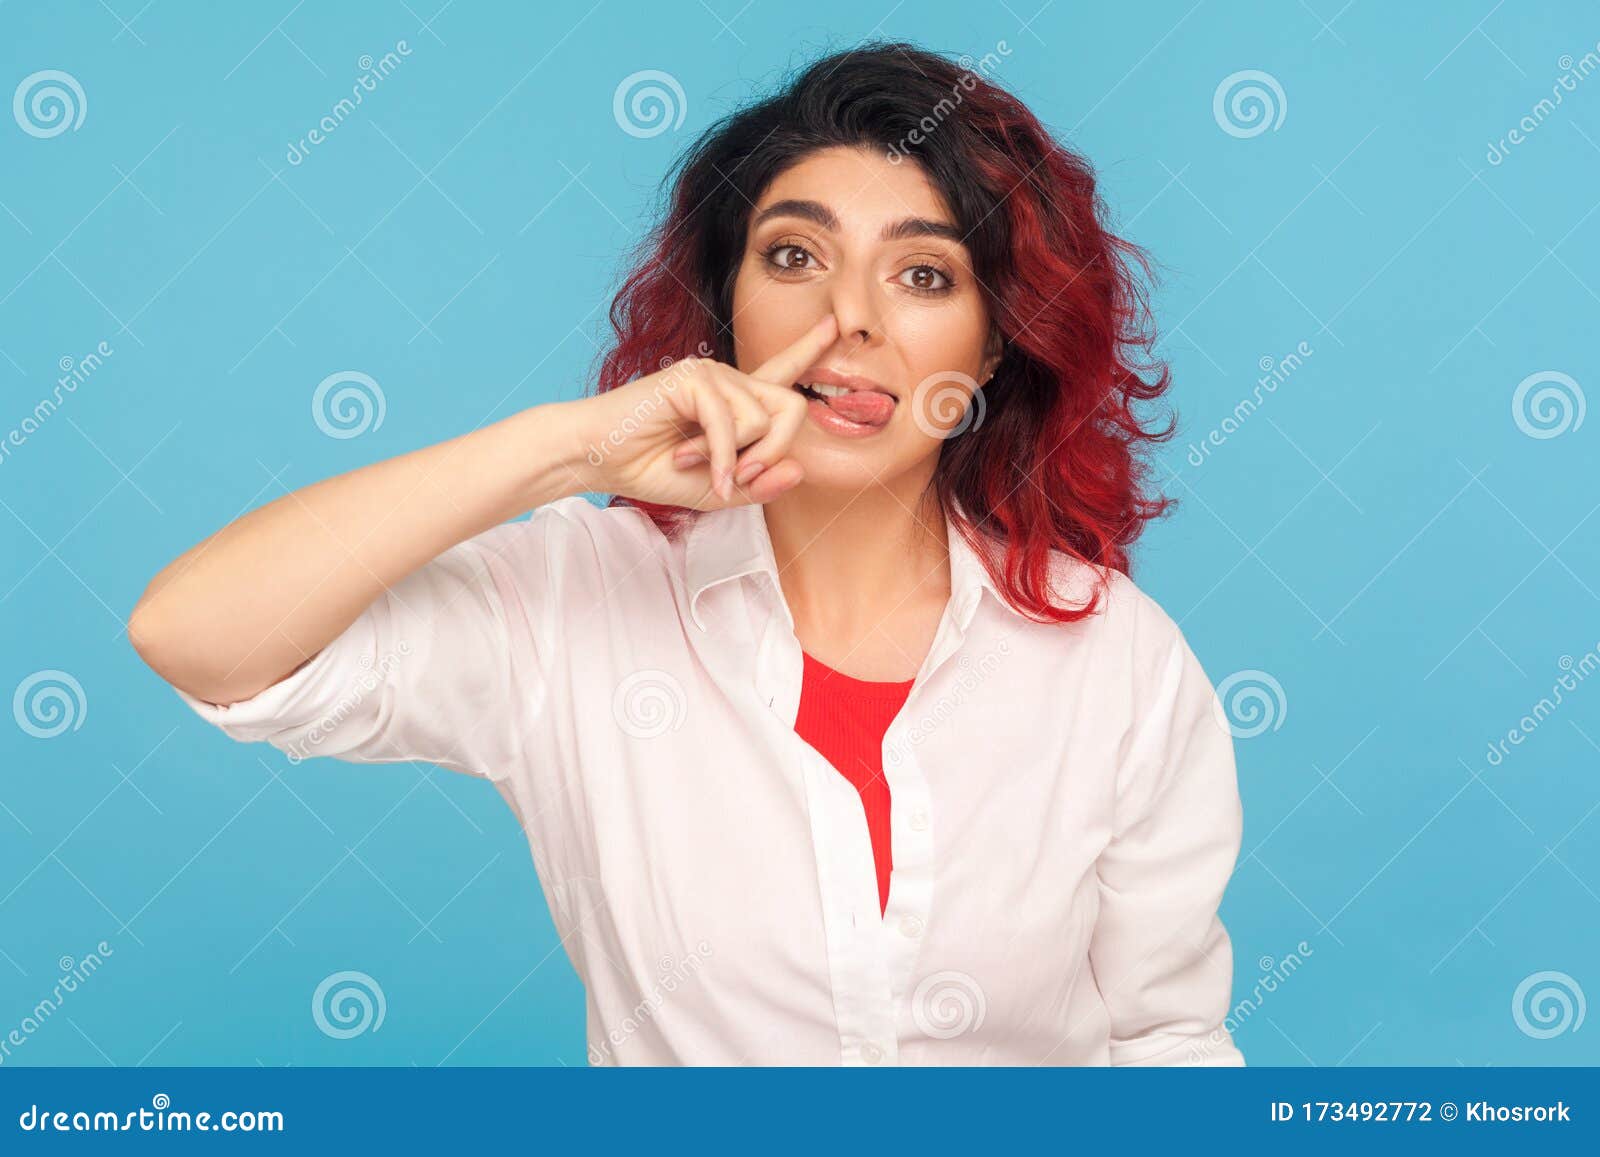 bad manners, misconduct. portrait of funny comical hipster woman with fancy red hair picking her nose